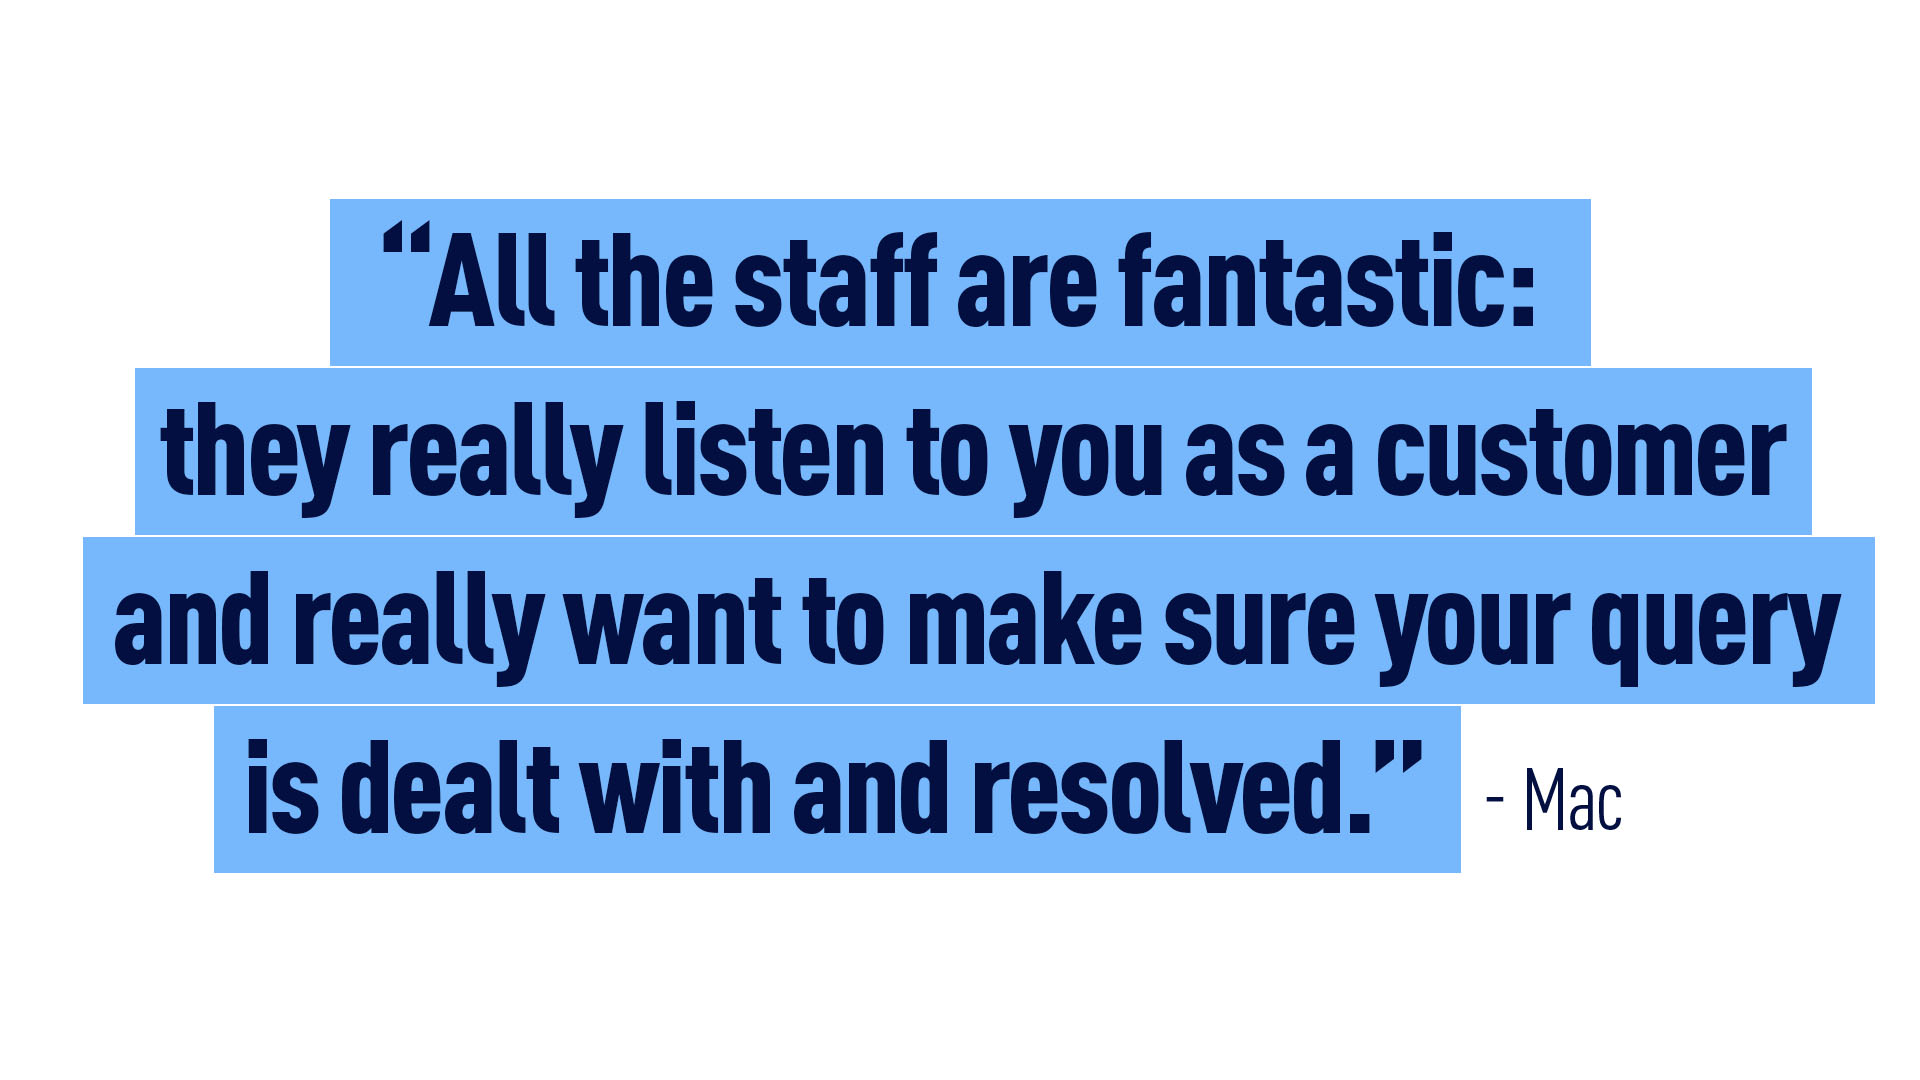 Mac – “All the staff are fantastic: they really listen to you as a customer and really want to make sure your query is dealt with and resolved.”